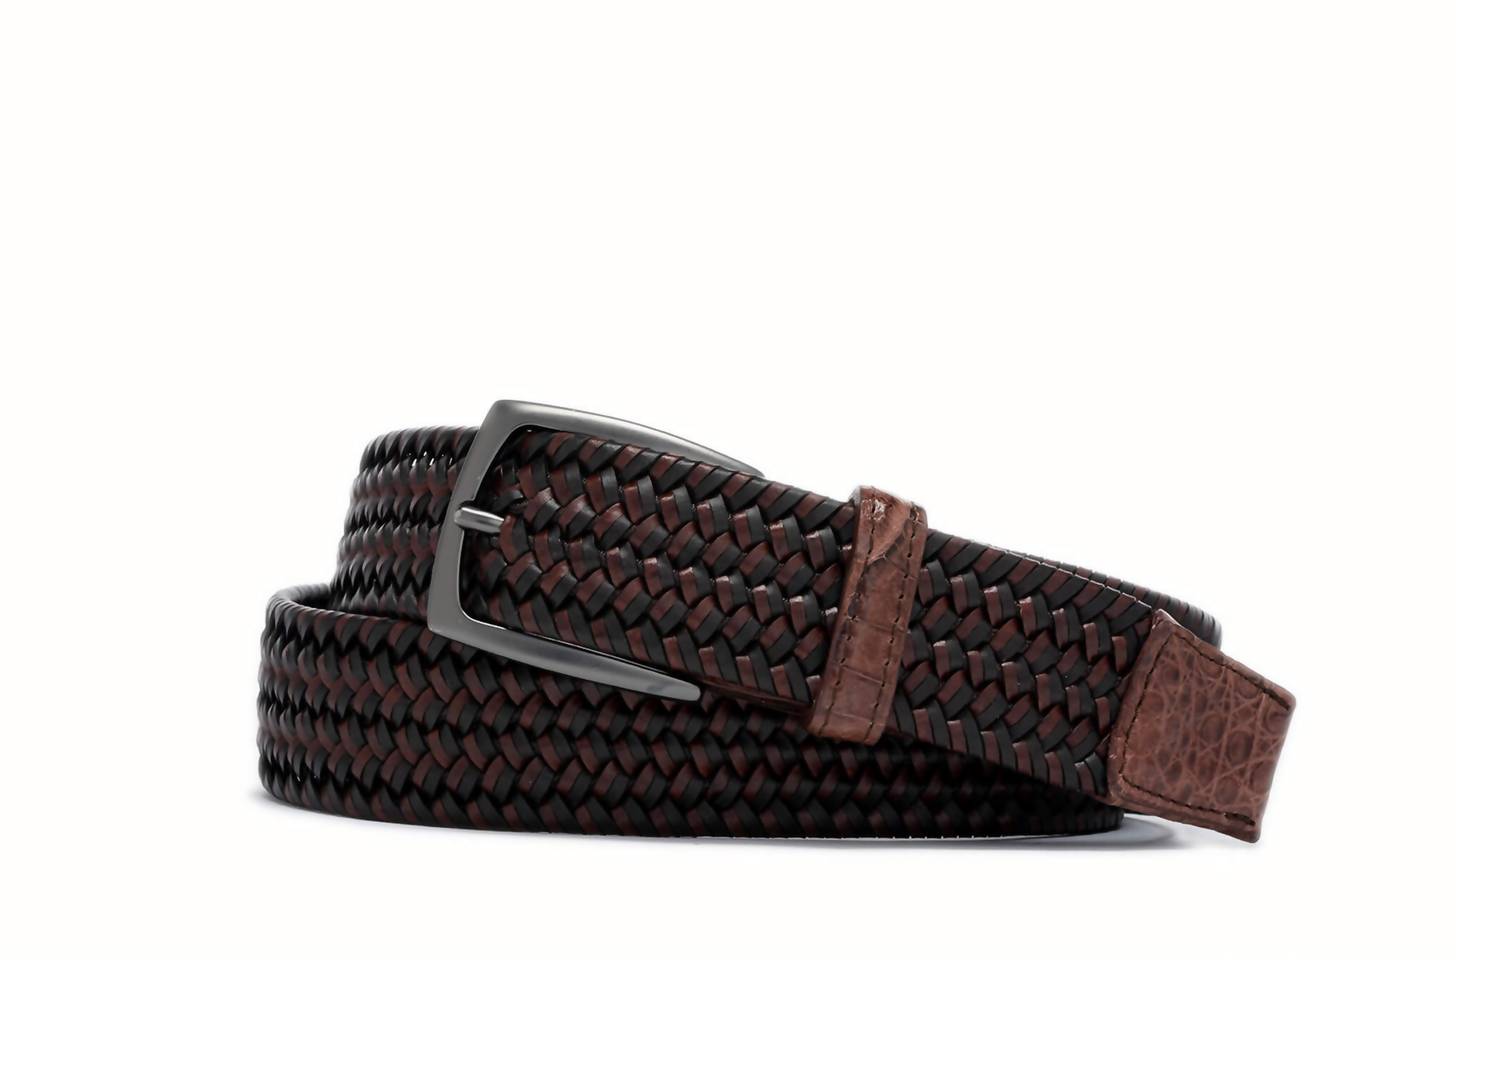 W. KLEINBERG Men'S Leather Stretch Belt With Croc Tabs And Buckle in Cigar/Gunmetal